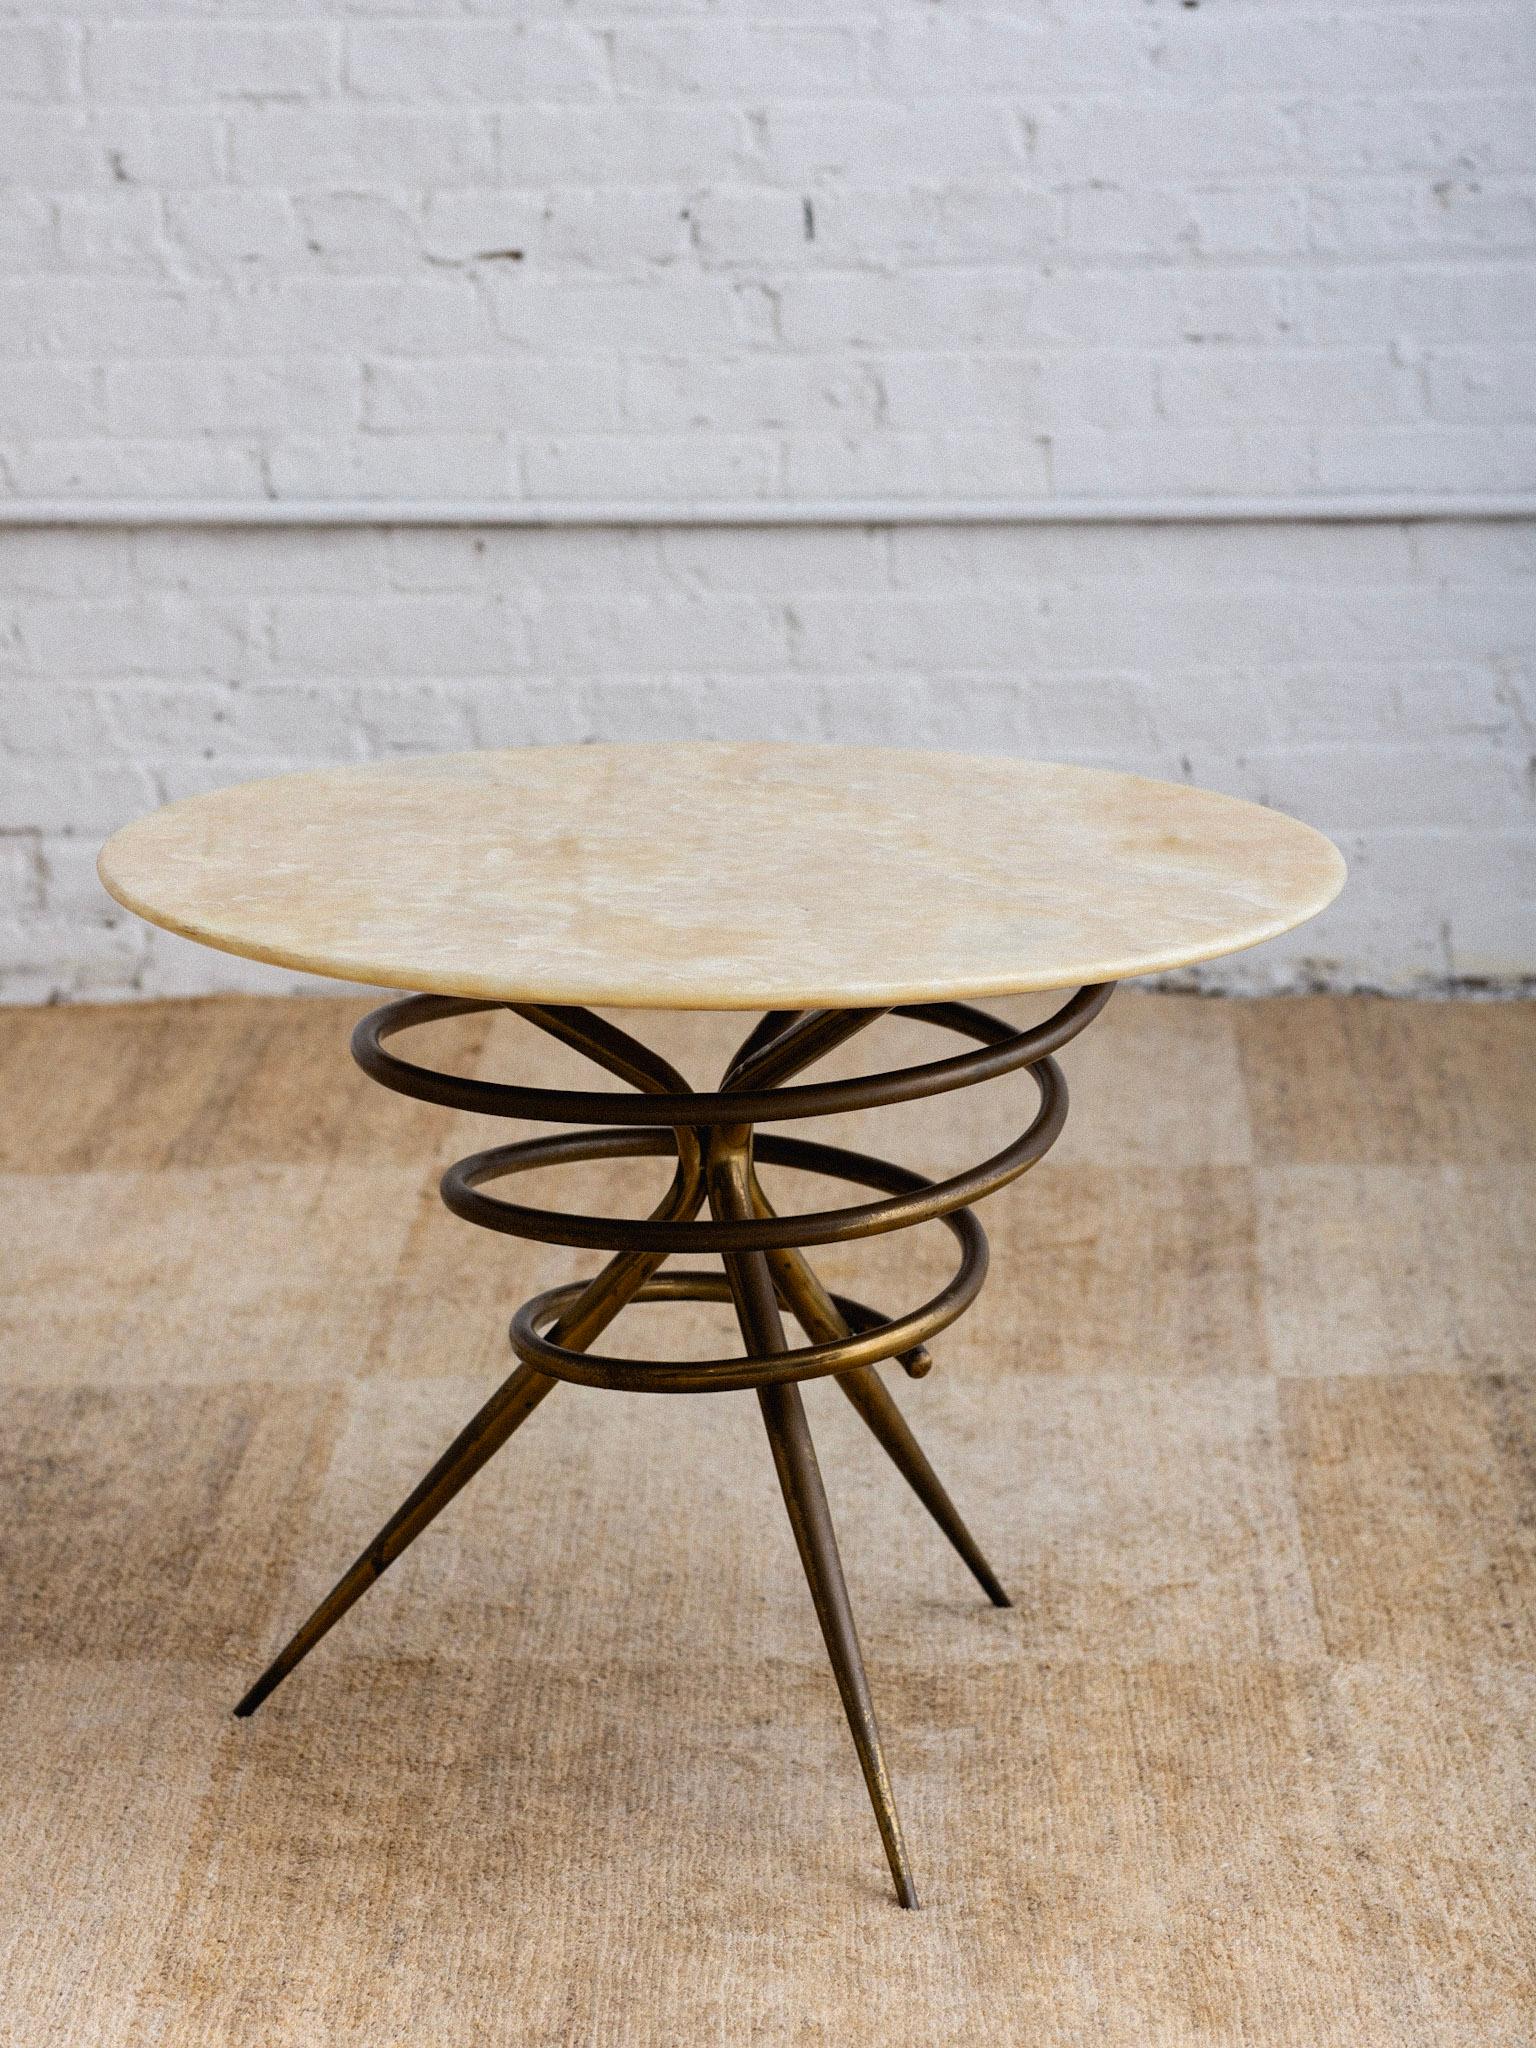 A mid century Italian cocktail table. Tubular spiral form brass base supports the round stone top. Stone exhibits a swirled pattern in warm sand tones, beiges and cream. Brass shows a rich darkened patina. Table top is .5” thick. Sourced in Northern